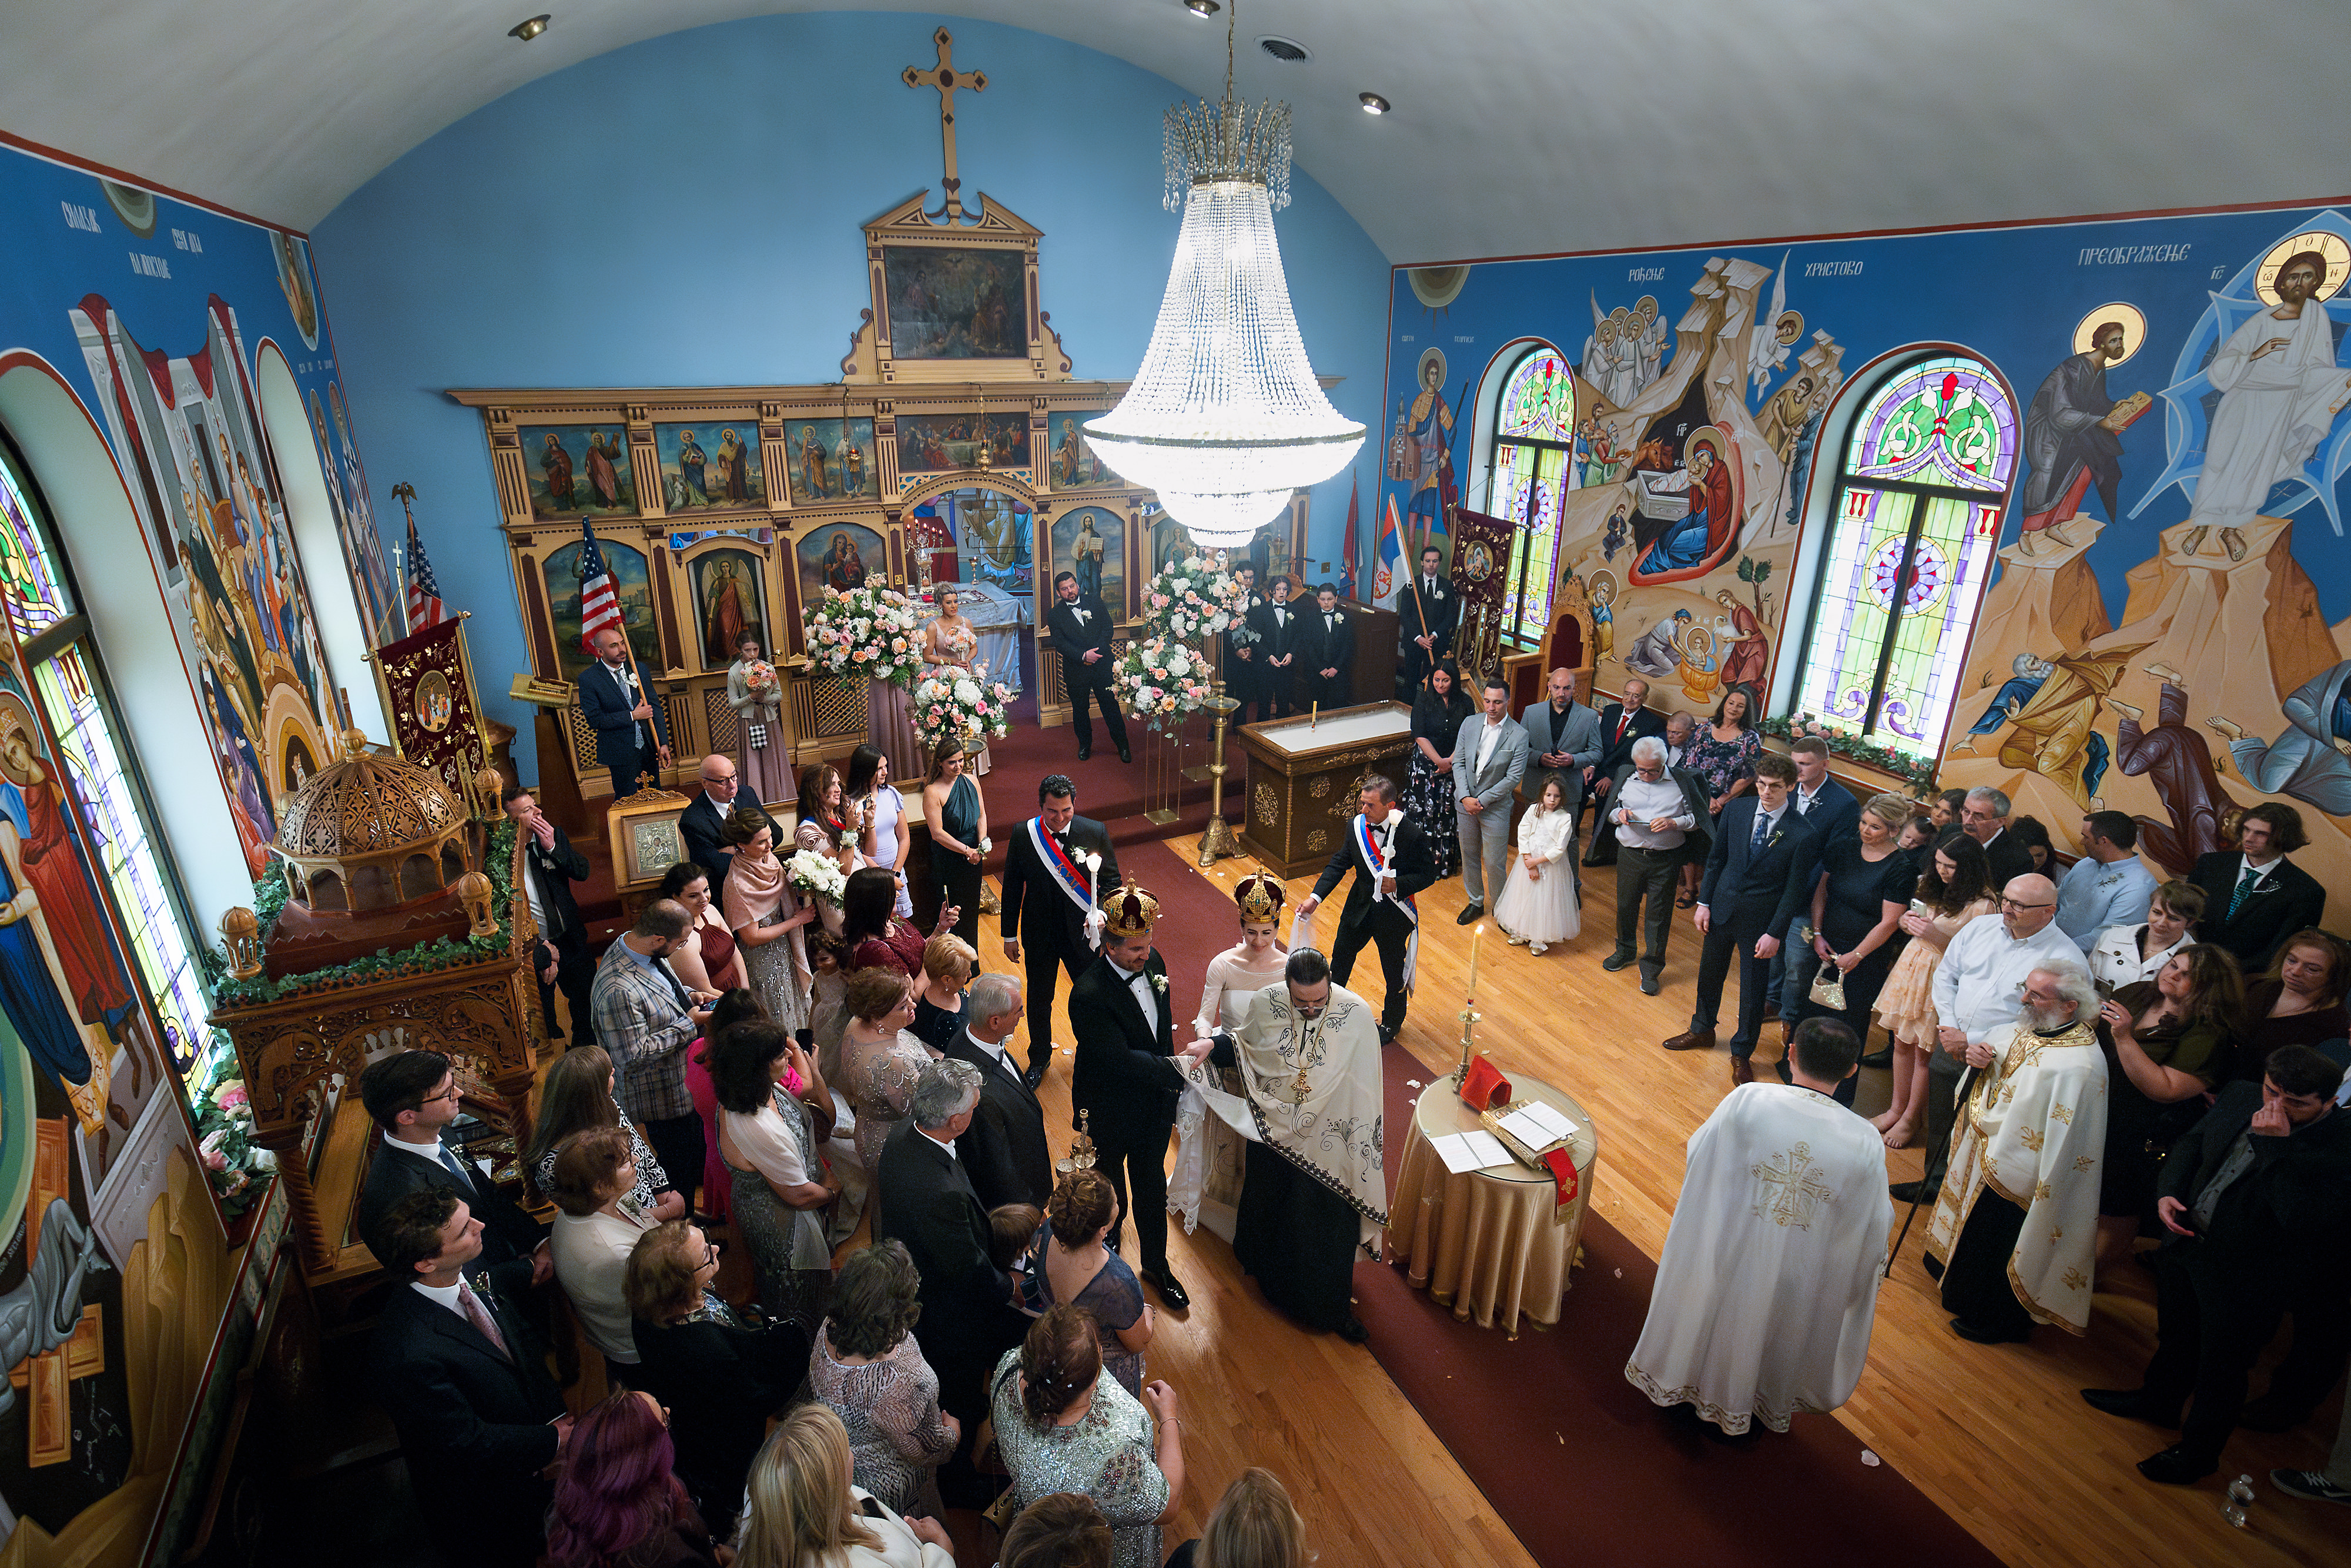 Serbian Orthodox Wedding at St. George church in East Chicago Indiana